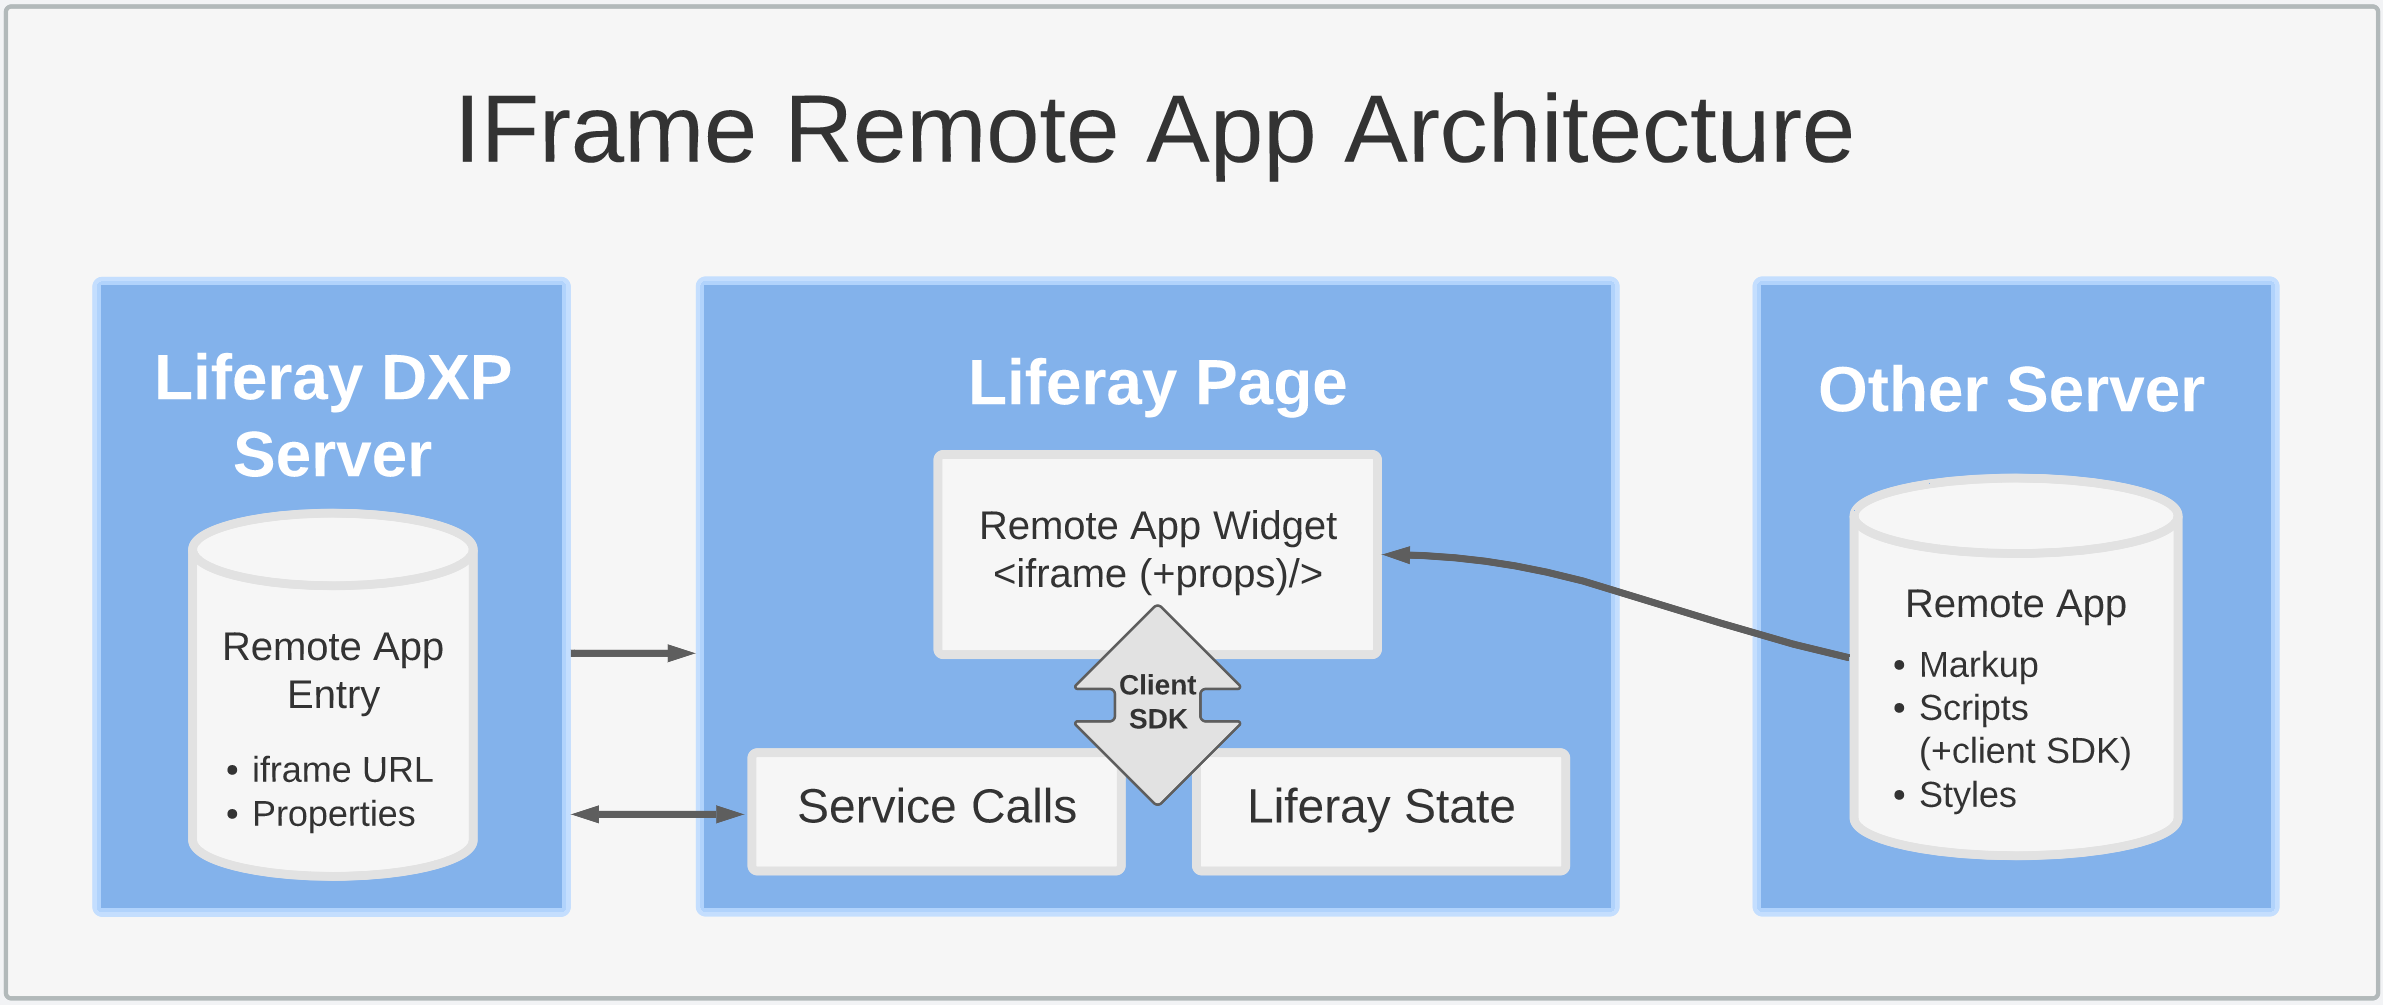 The IFrame architecture includes an entry in the Liferay server, an application hosted on an external server, and the Liferay Page with the client extension's unique widget.